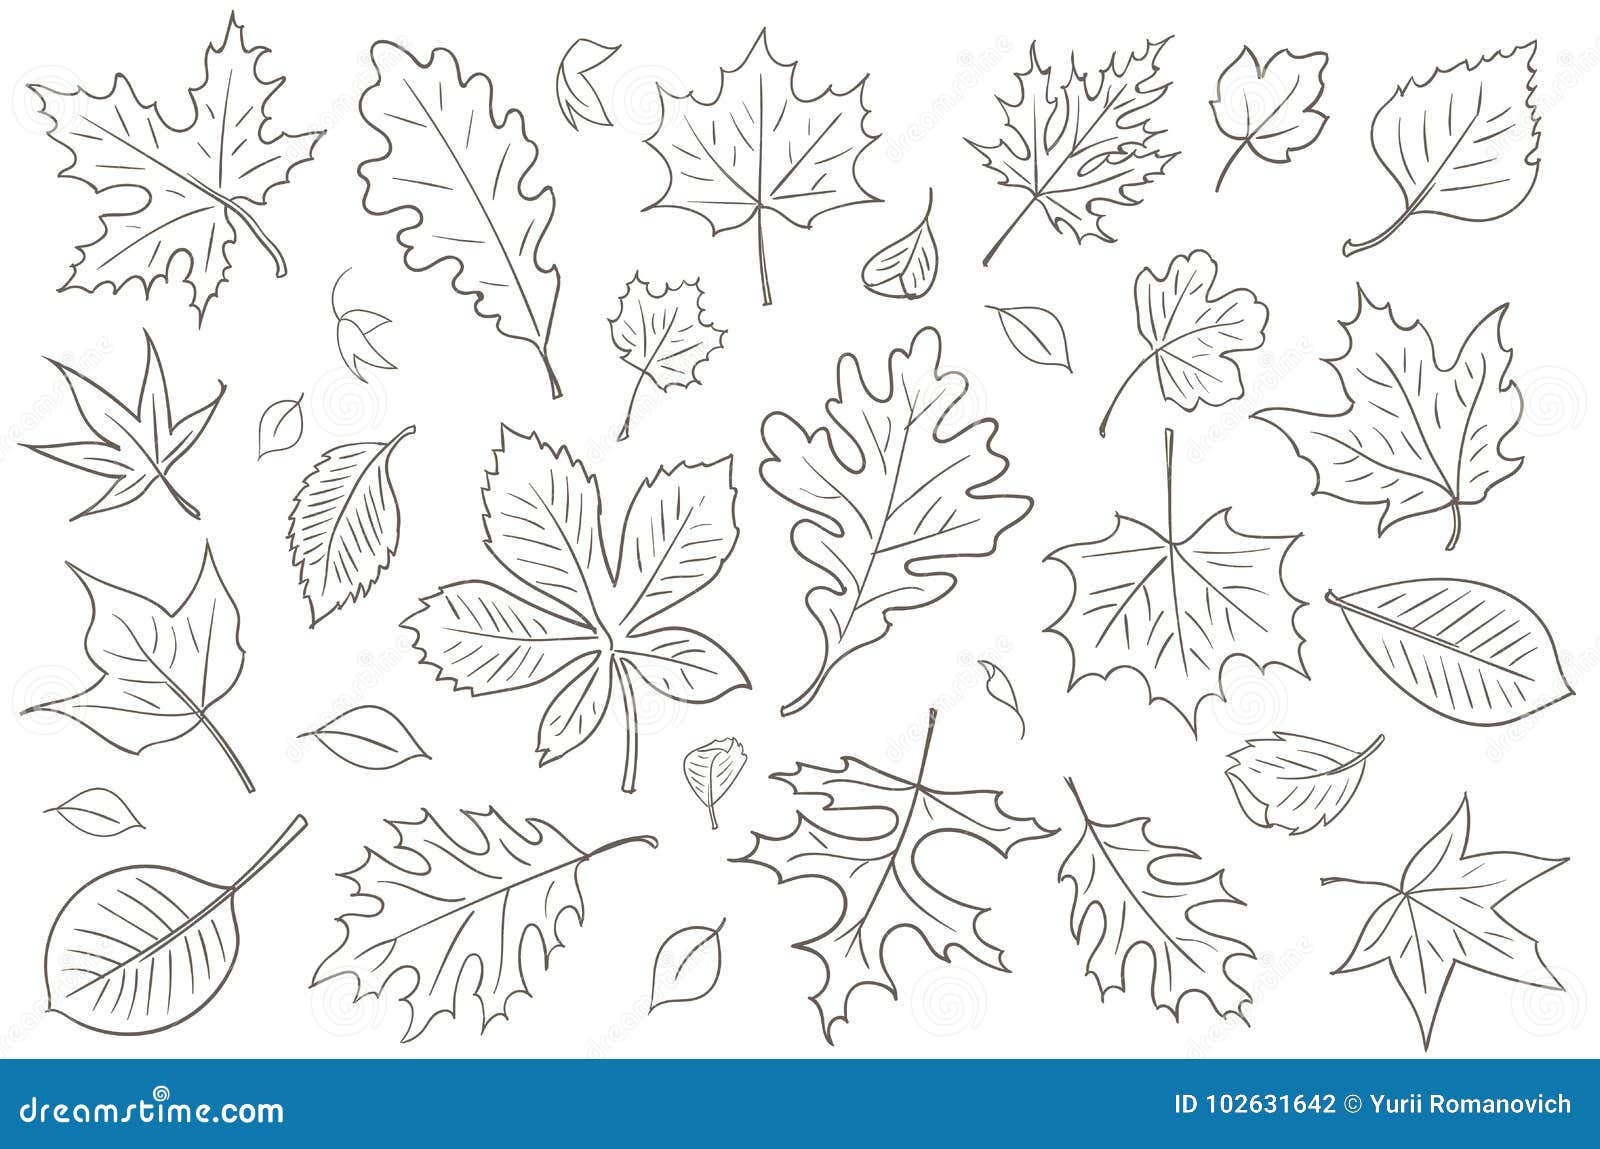 How To Draw An Autumn Leaf, Step by Step, Drawing Guide, by Dawn - DragoArt